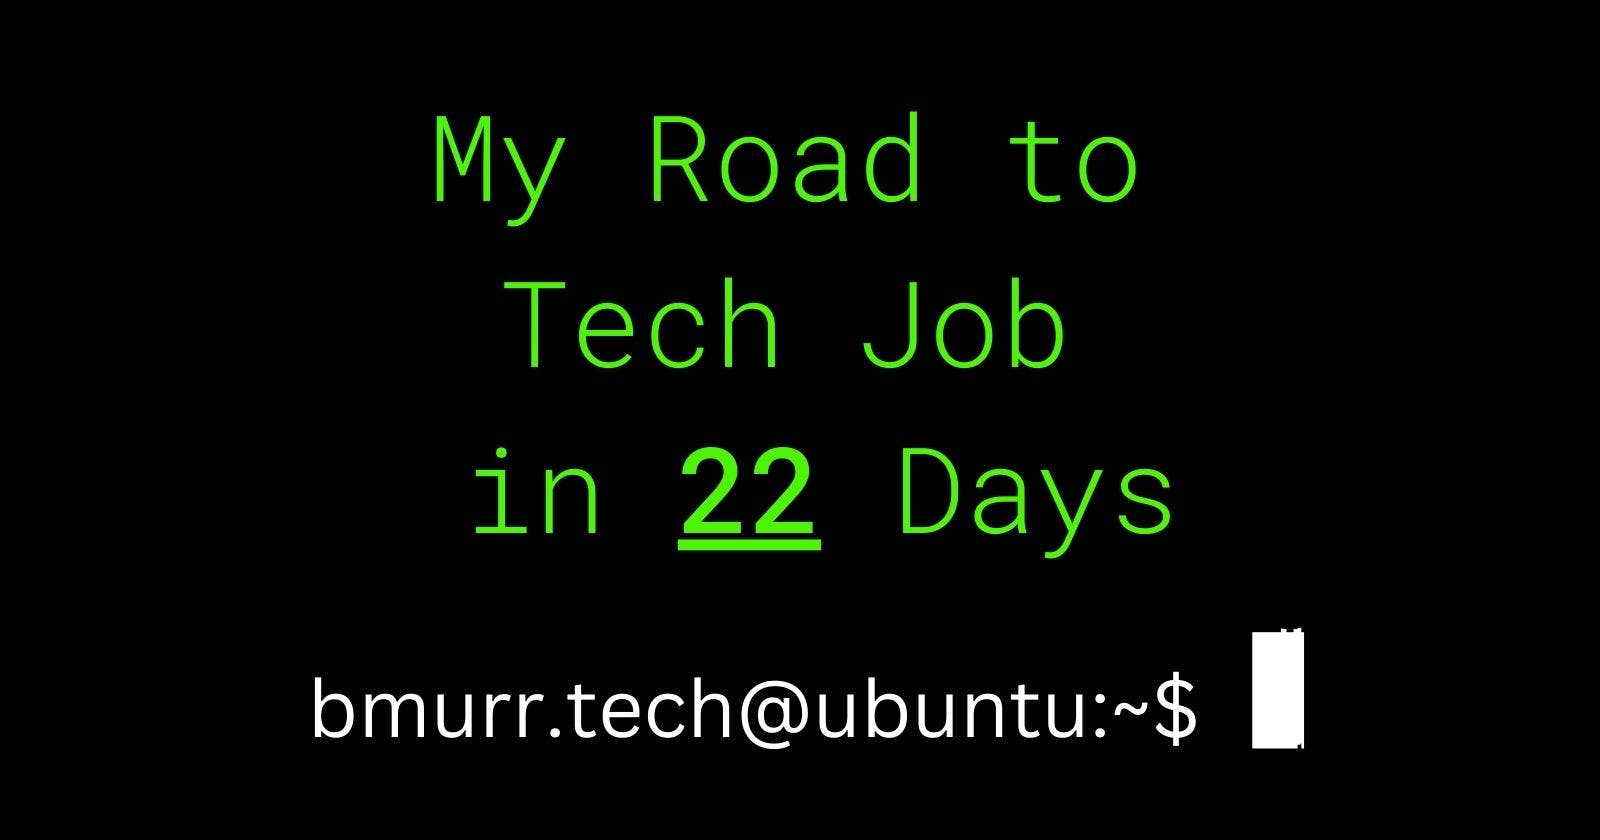 Dude w/ZERO experience & no IT degree gets full-time tech job w/benefits in 22 days